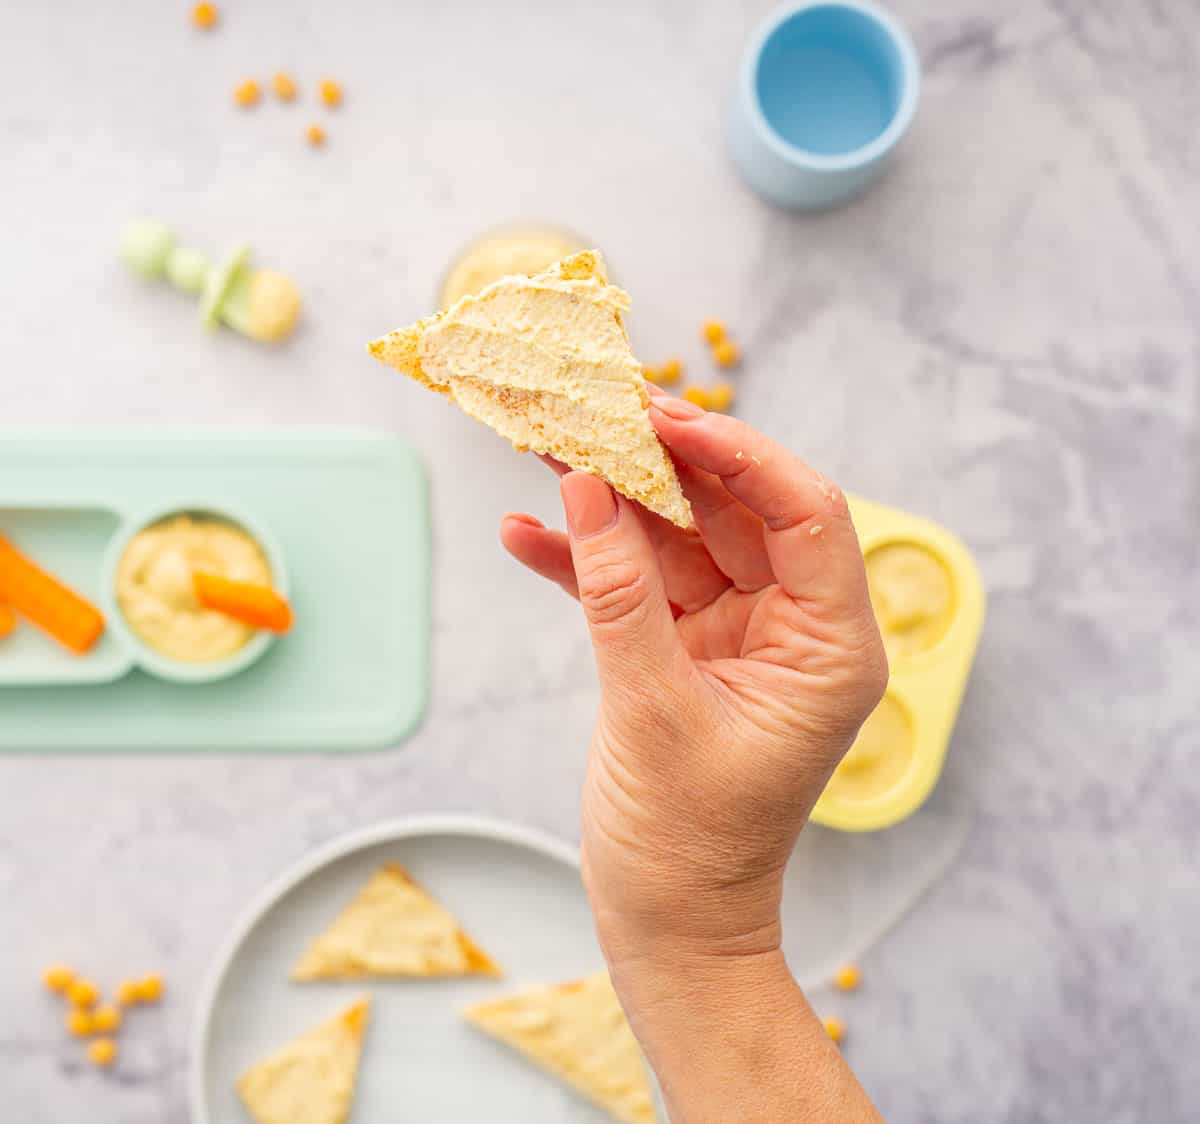 A hand holding up a slice of toast with hummus spread on it hovering above a yellow muffin case filled with baby hummus sitting next to a ramekin of hummus and a baby plate with carrots dunked into hummus, chickpeas scattered on the bench.